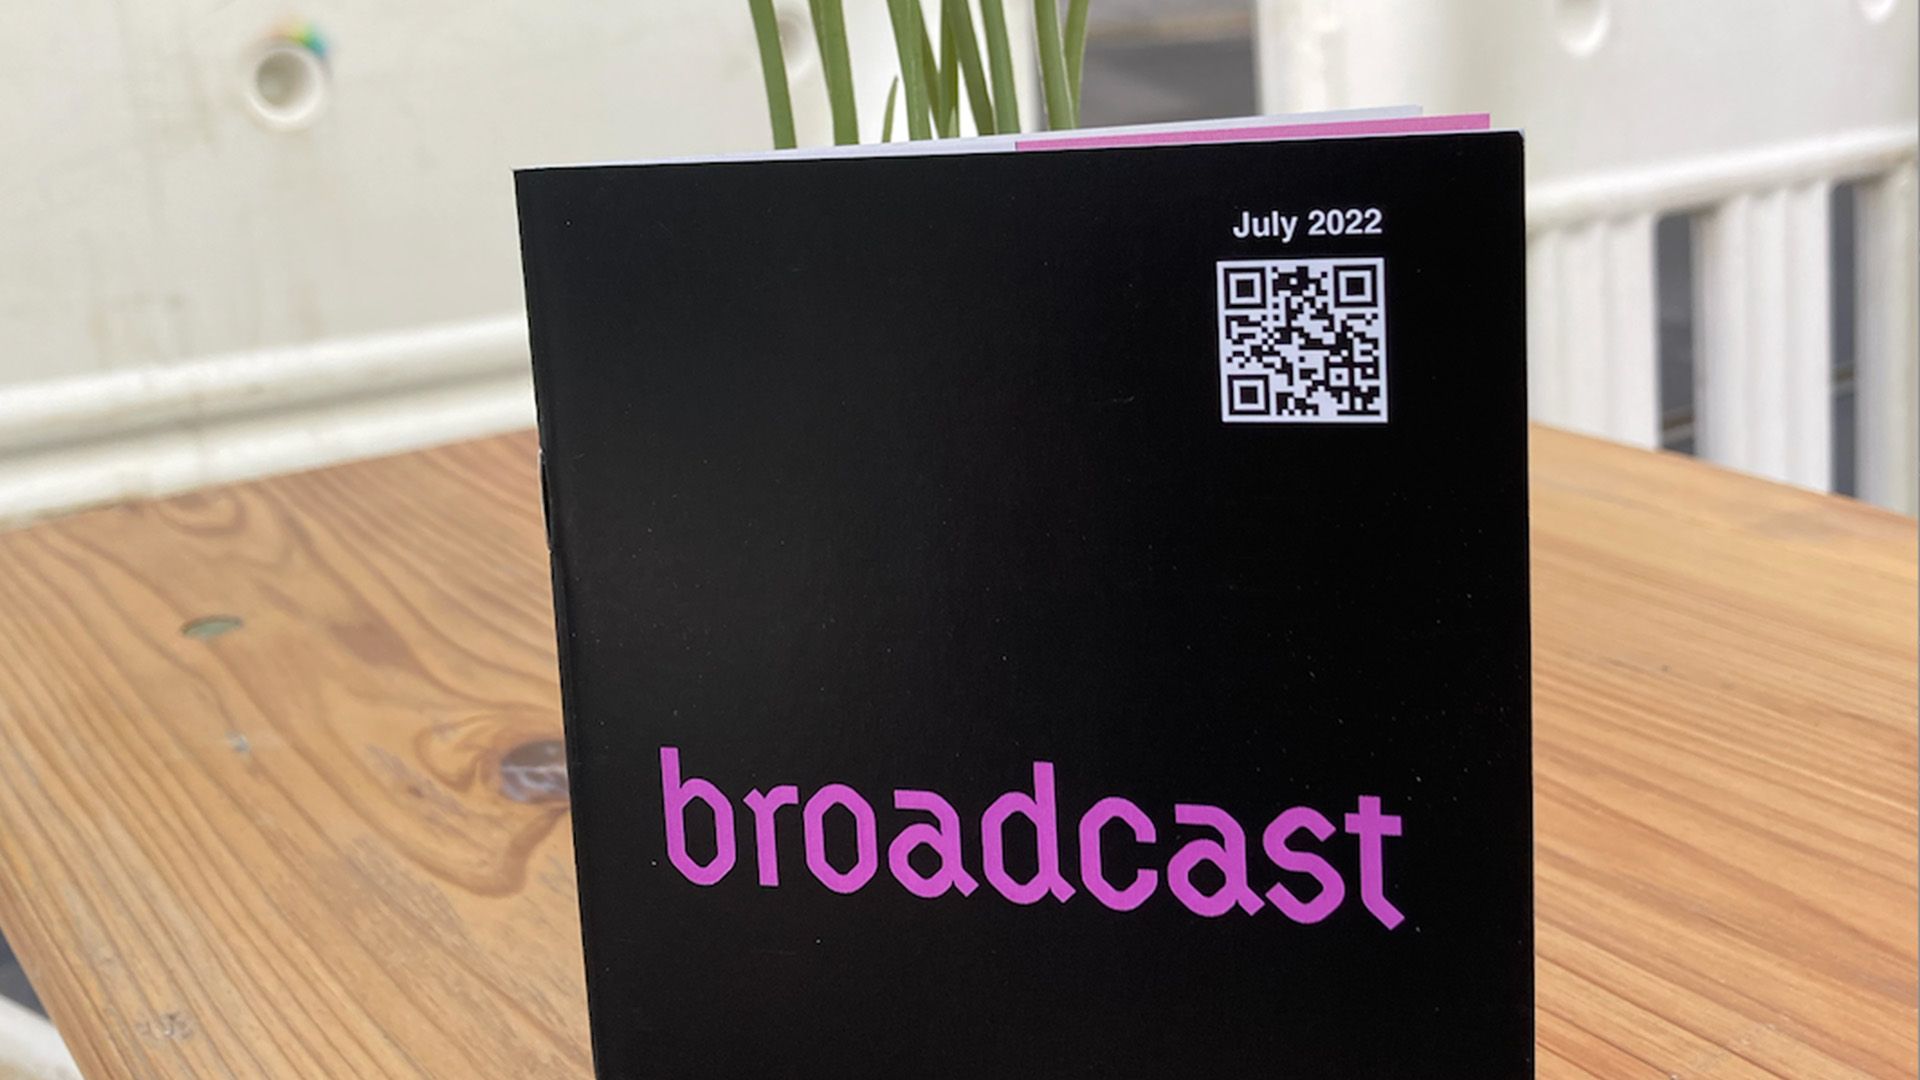 Cover Image for The July 2022 edition of the Broadcast magazine is out!